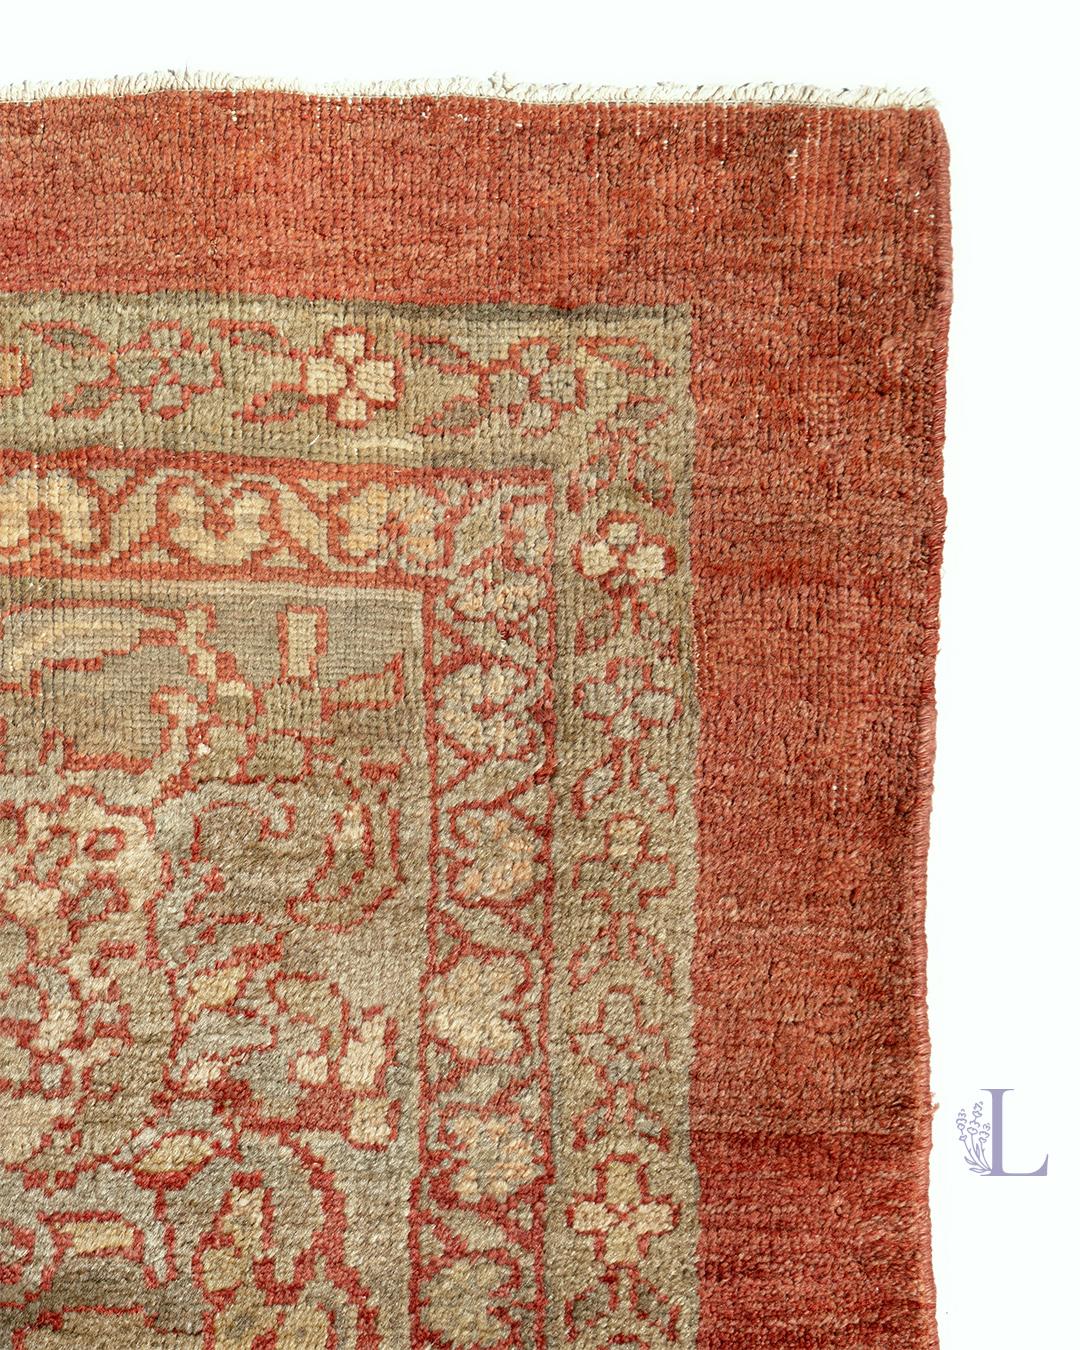 Antique Oversize Persian Terracotta Sultanabad Rug, circa 1880  17'6 x 23'9 For Sale 3